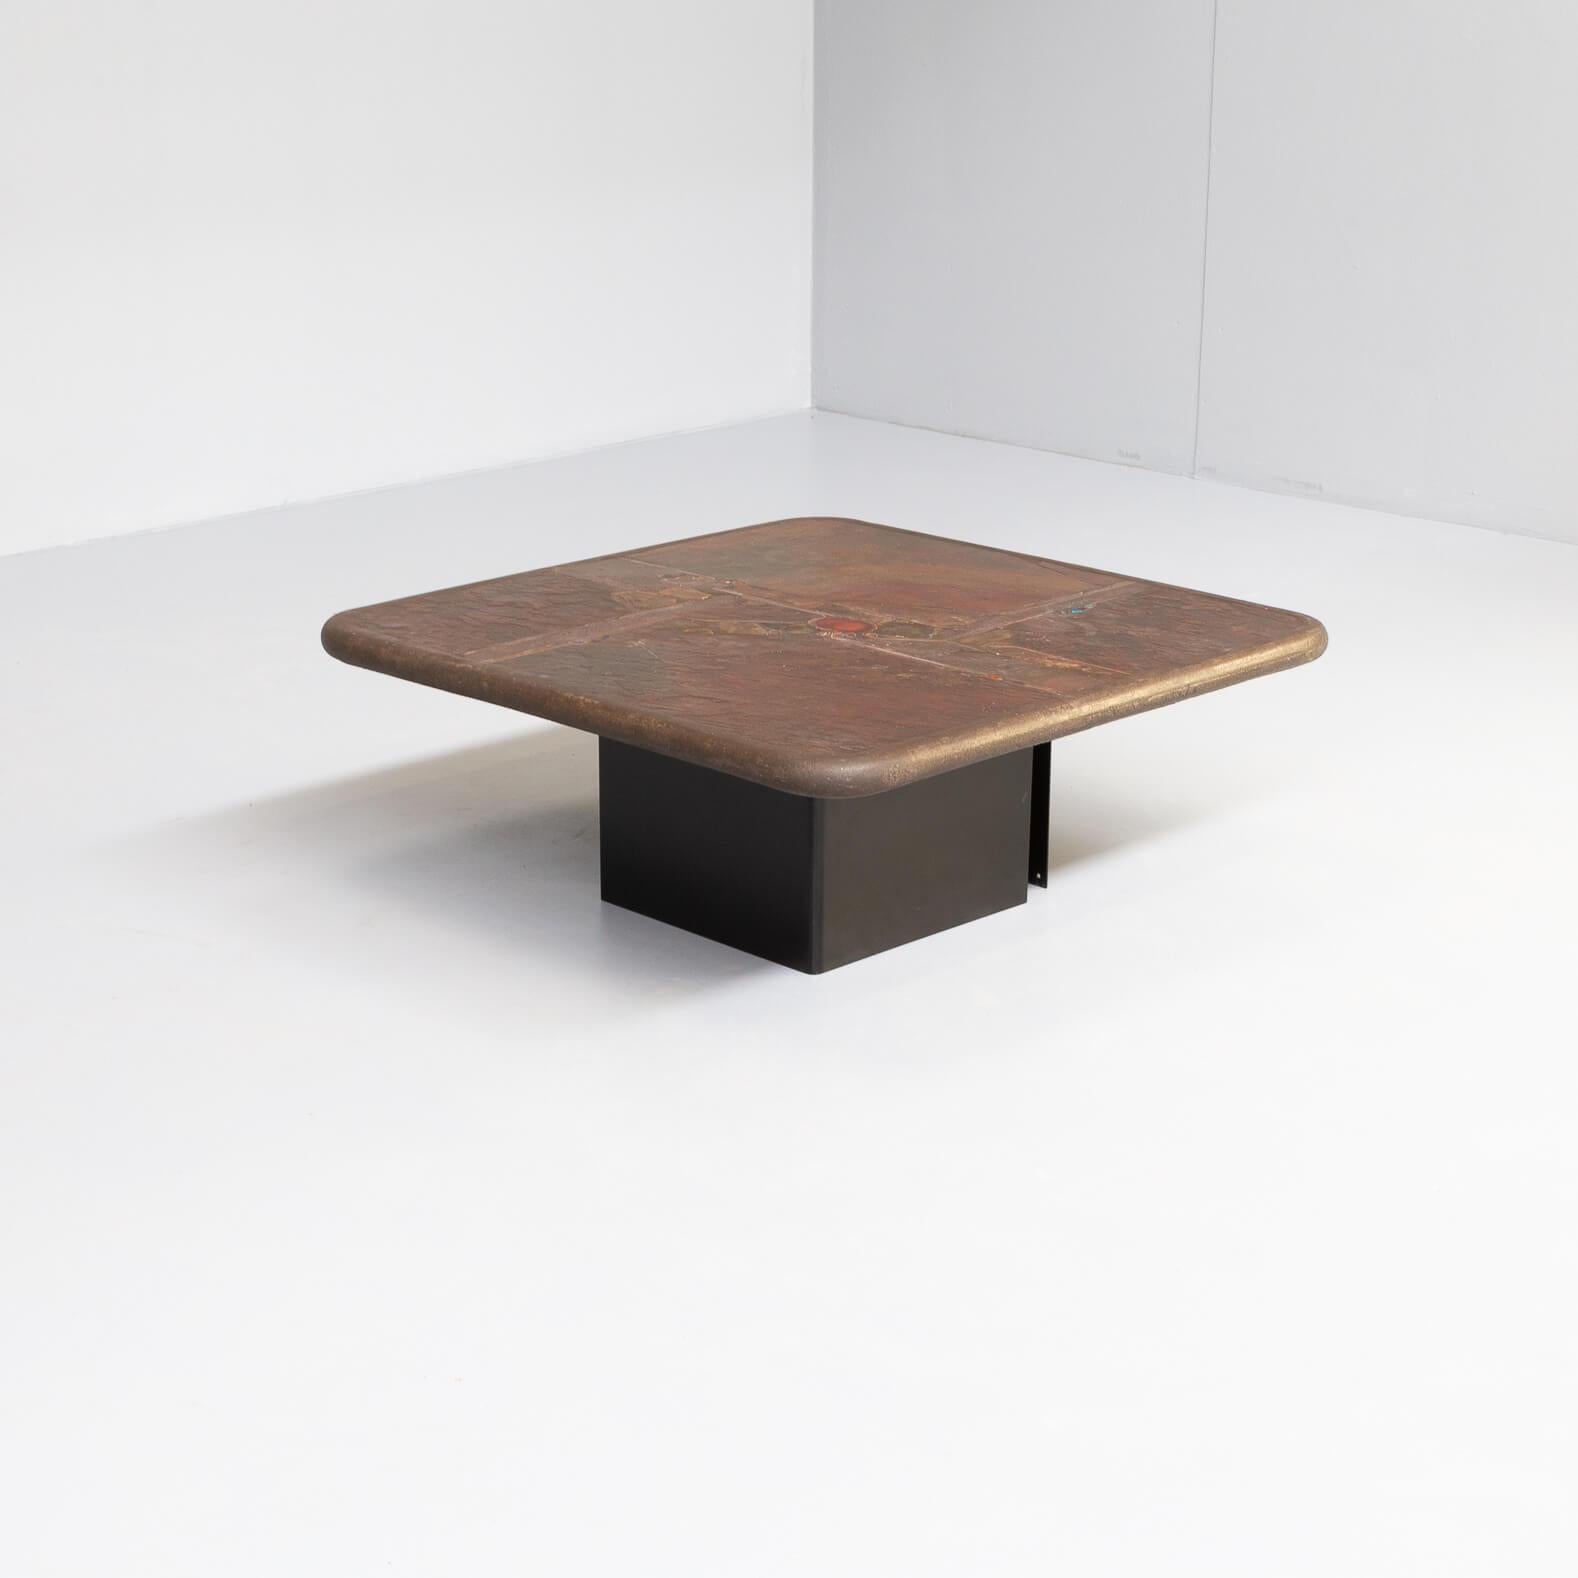 This natural stone rectangle coffee table is very good conserved and very rare with it’s beautiful agate stone and copper inlay. Its stands on a metal square foot in two parts. Good condition consistent with age and use.